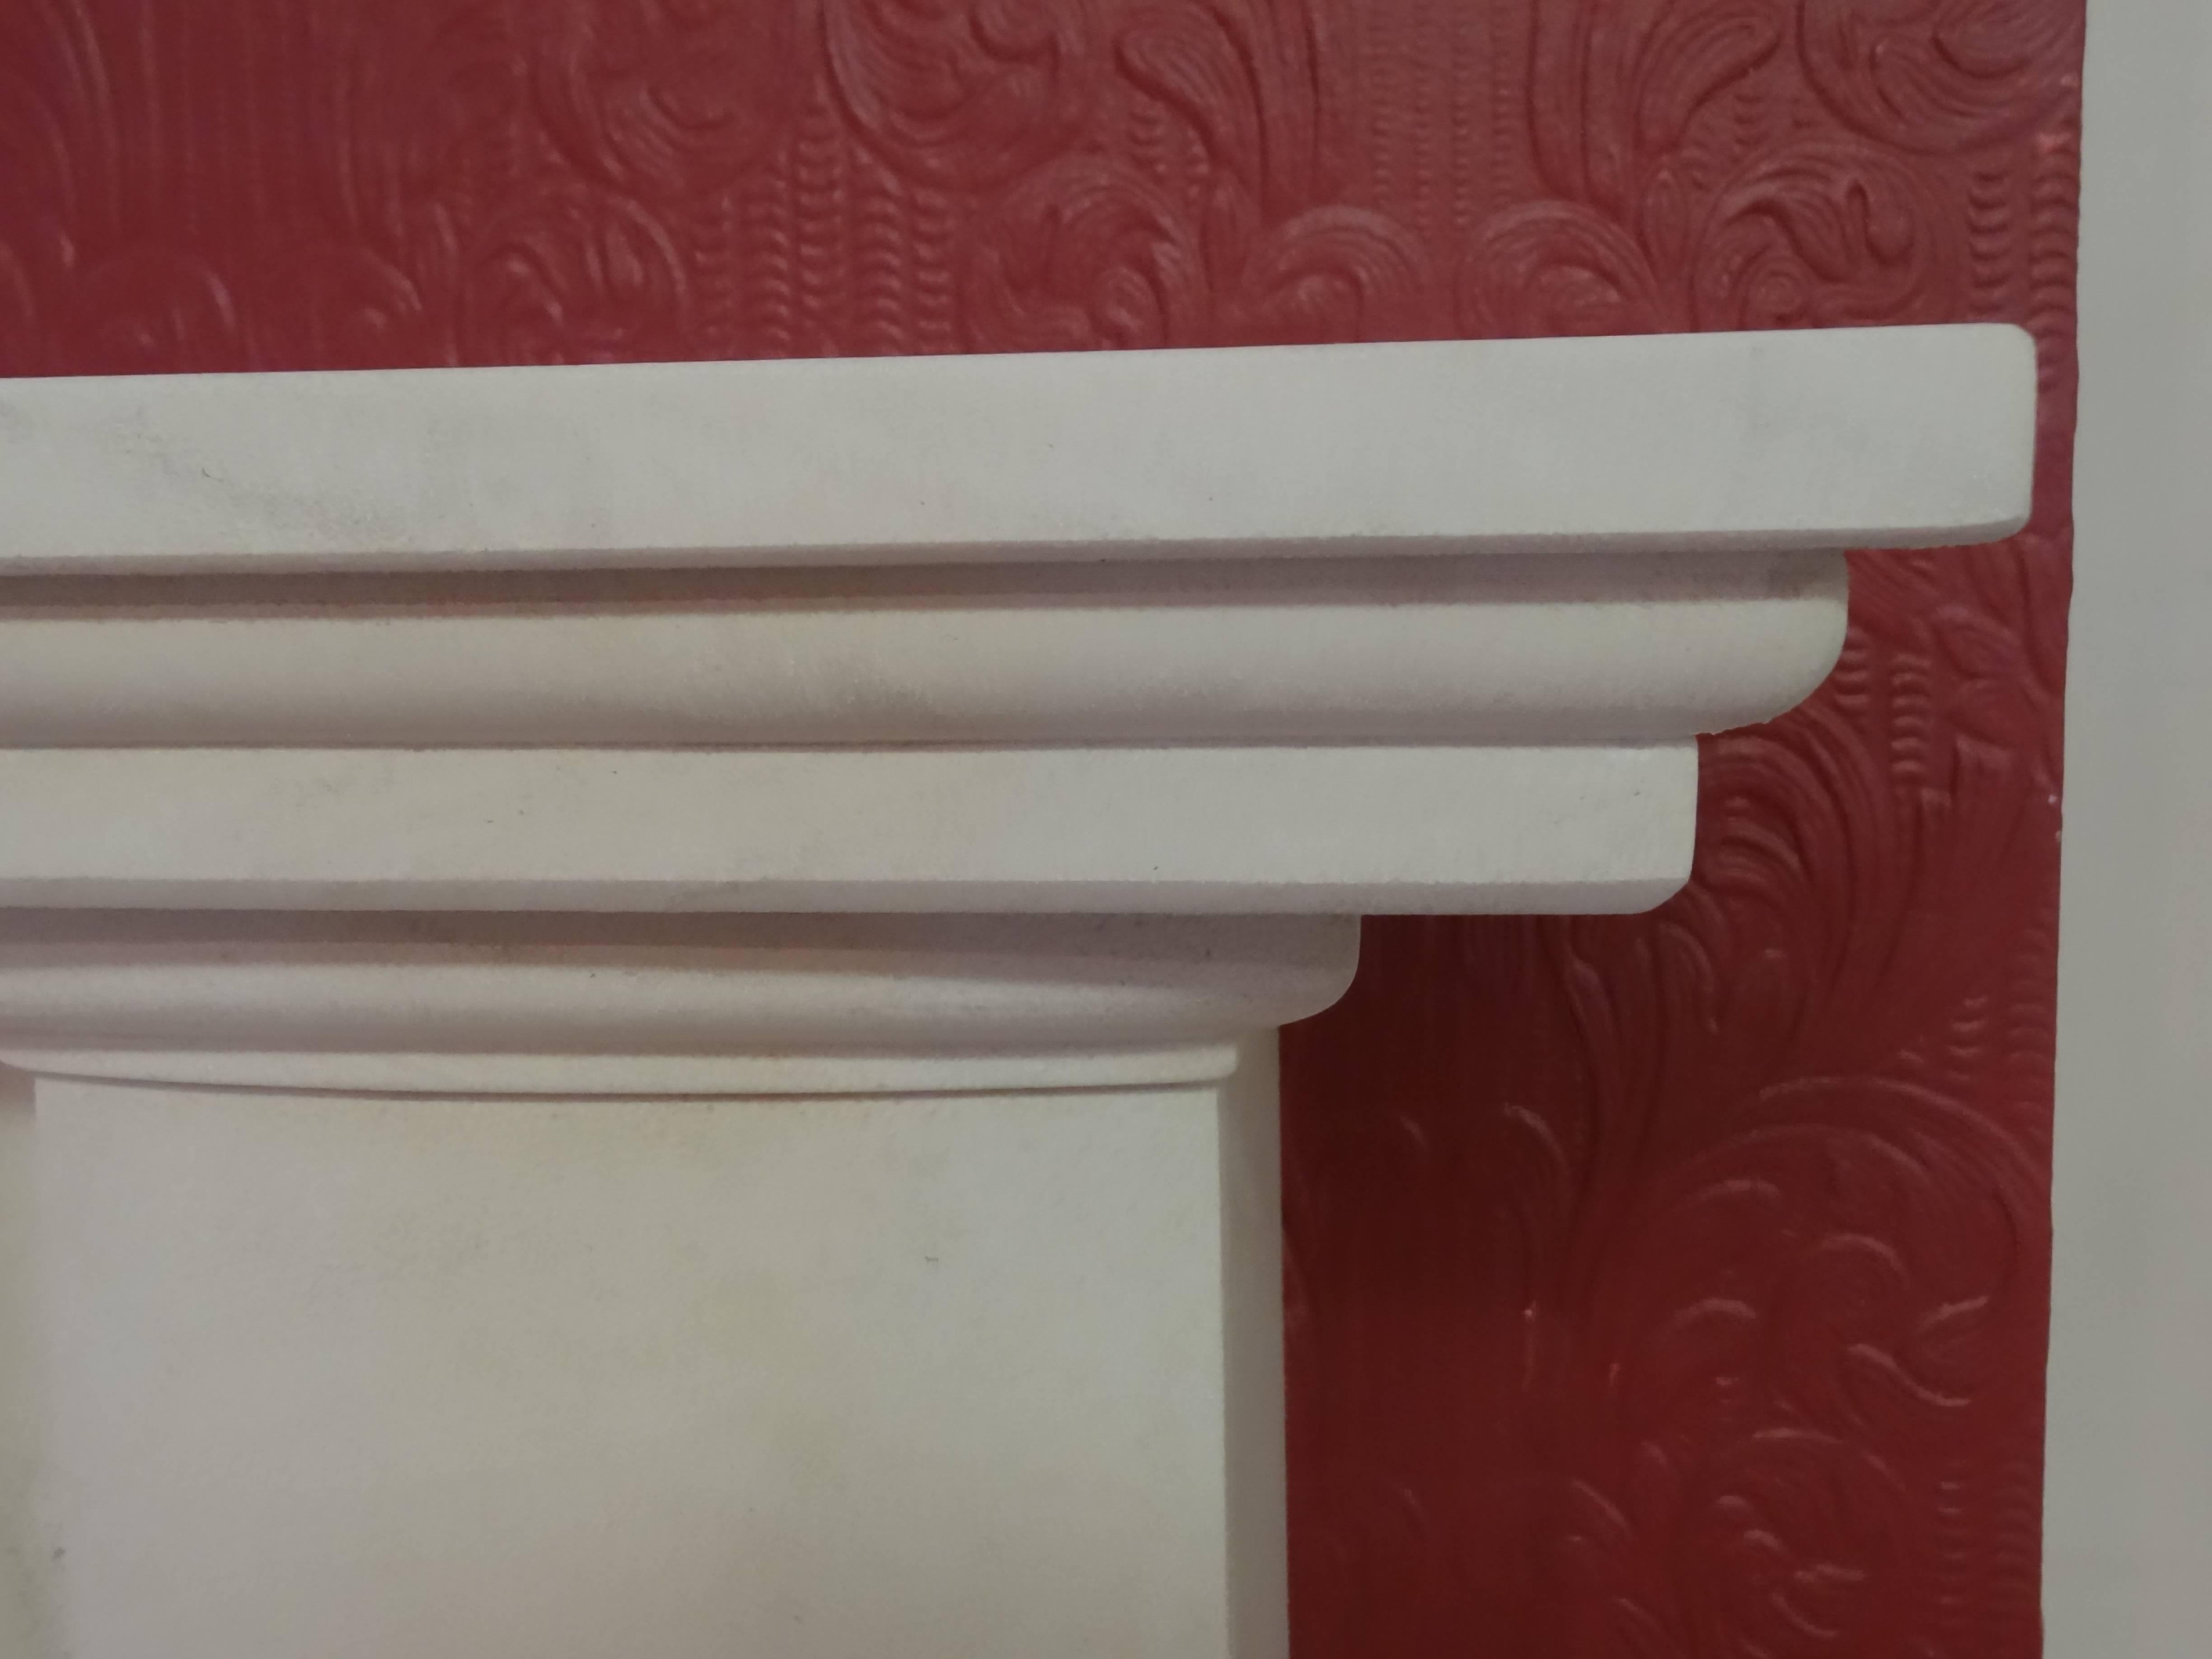 21st Century Irish Carved Limestone Fireplace Metal Trim and Fire Basket In Excellent Condition For Sale In Lurgan, Northern Ireland